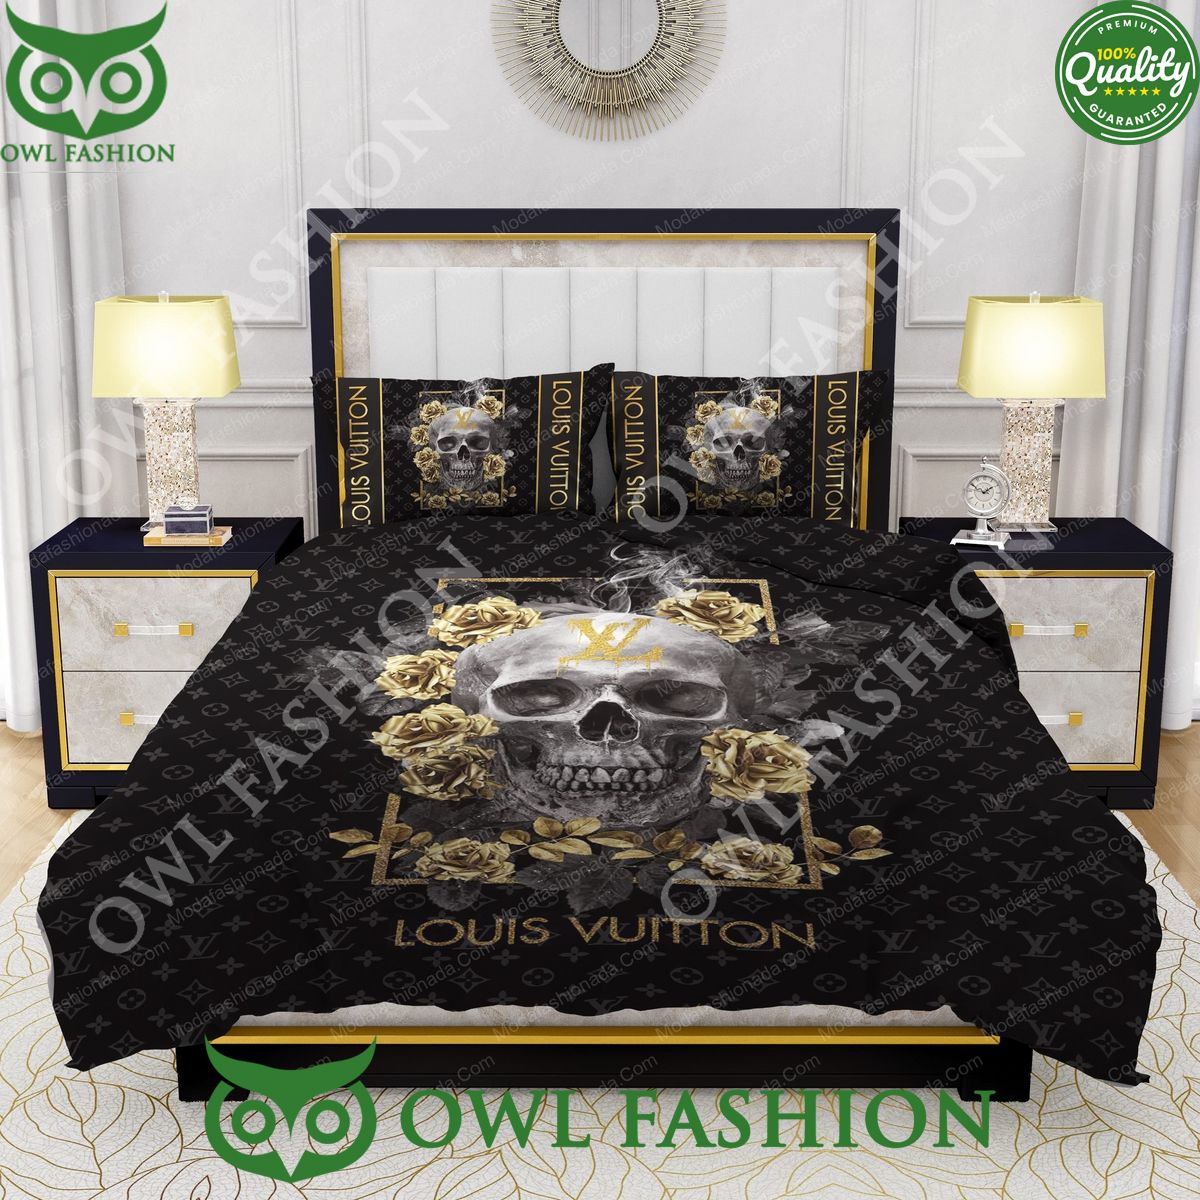 Skull And Golden Rose Louis Vuitton Bedding Sets Your beauty is irresistible.